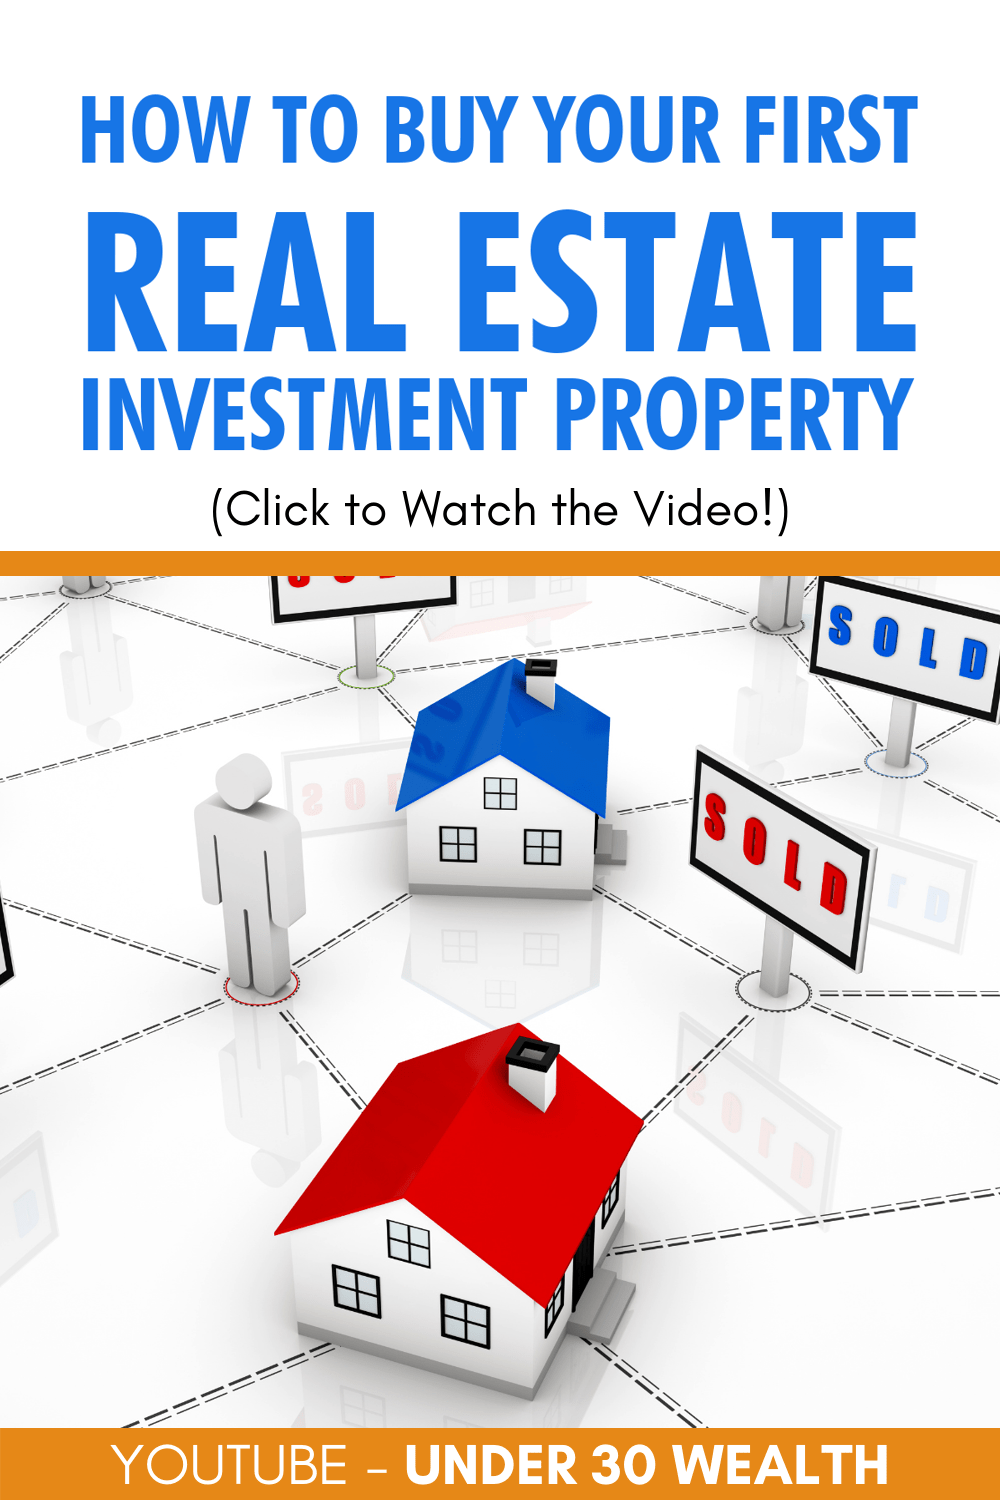 How to buy your first real estate investment